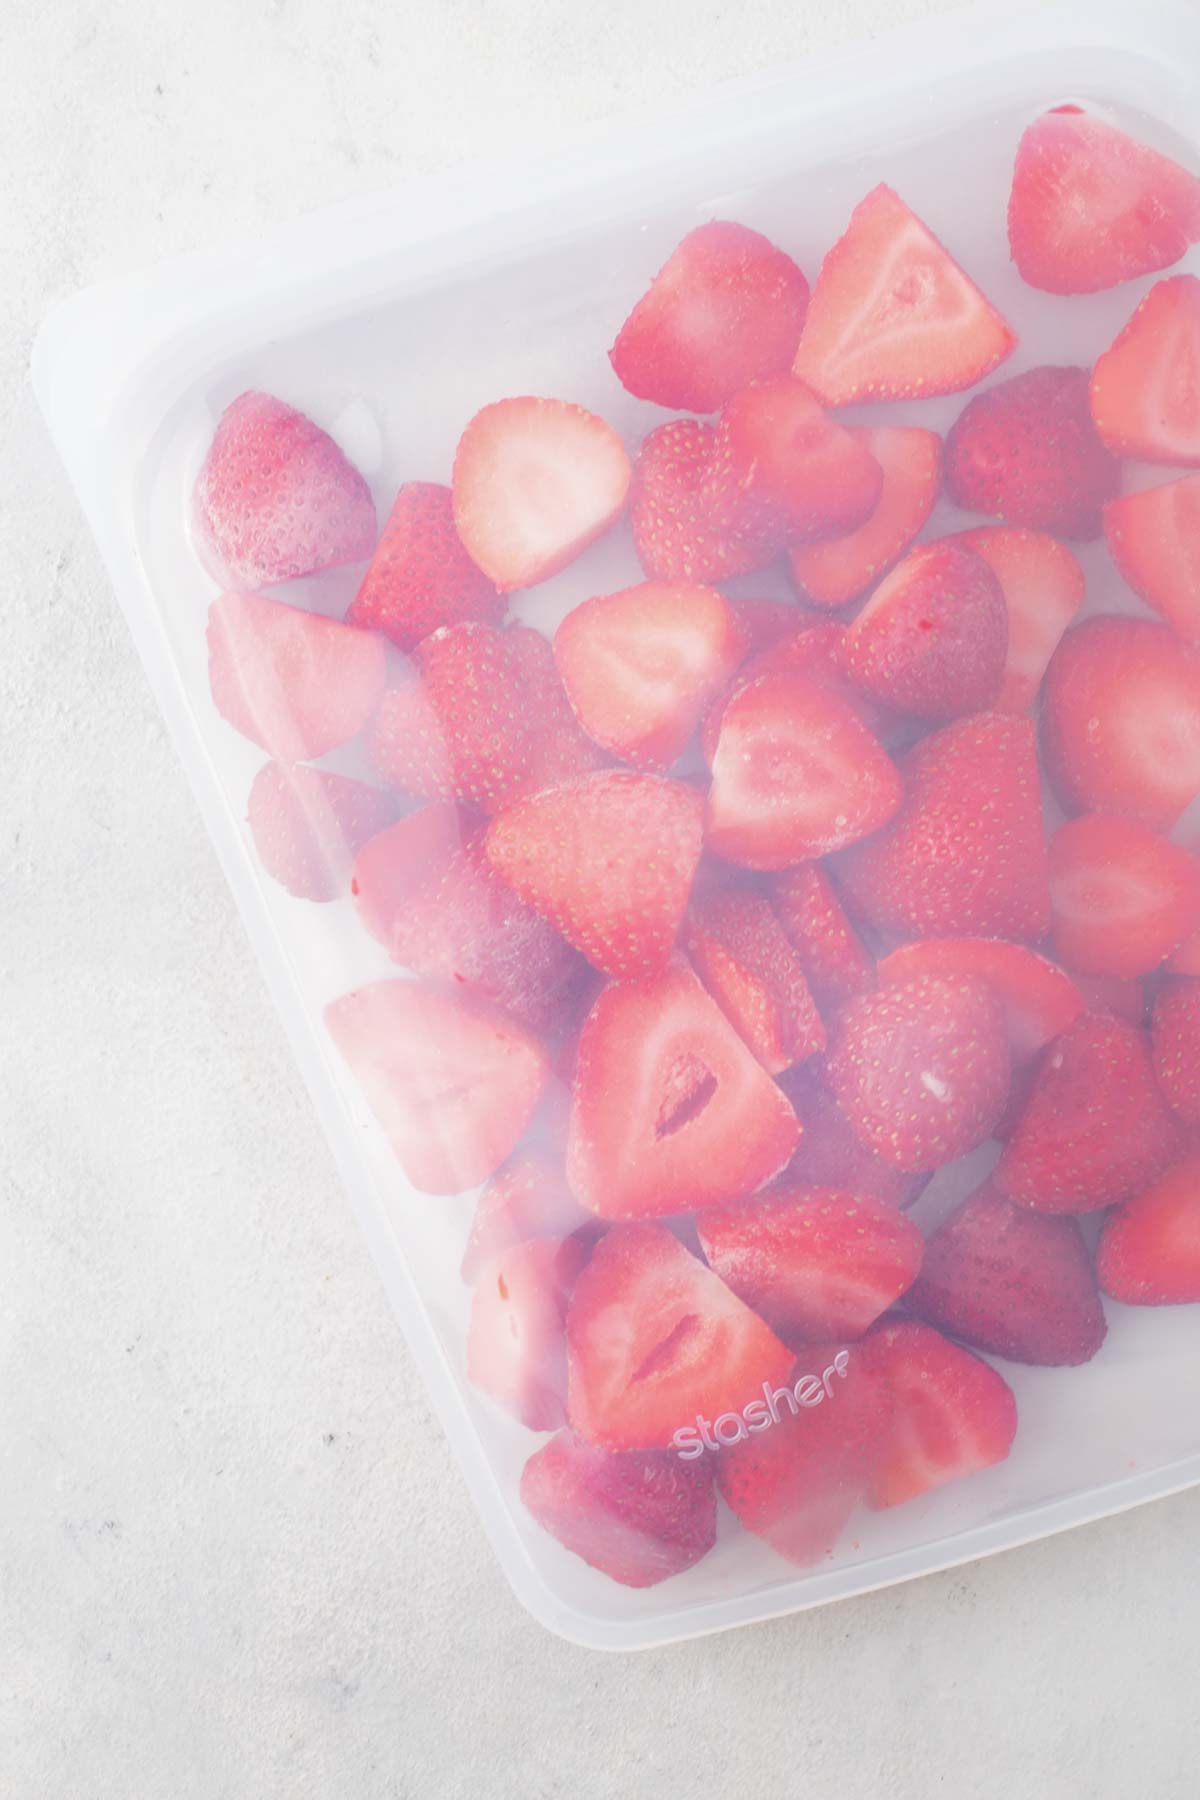 Frozen strawberries in a silicone bag.